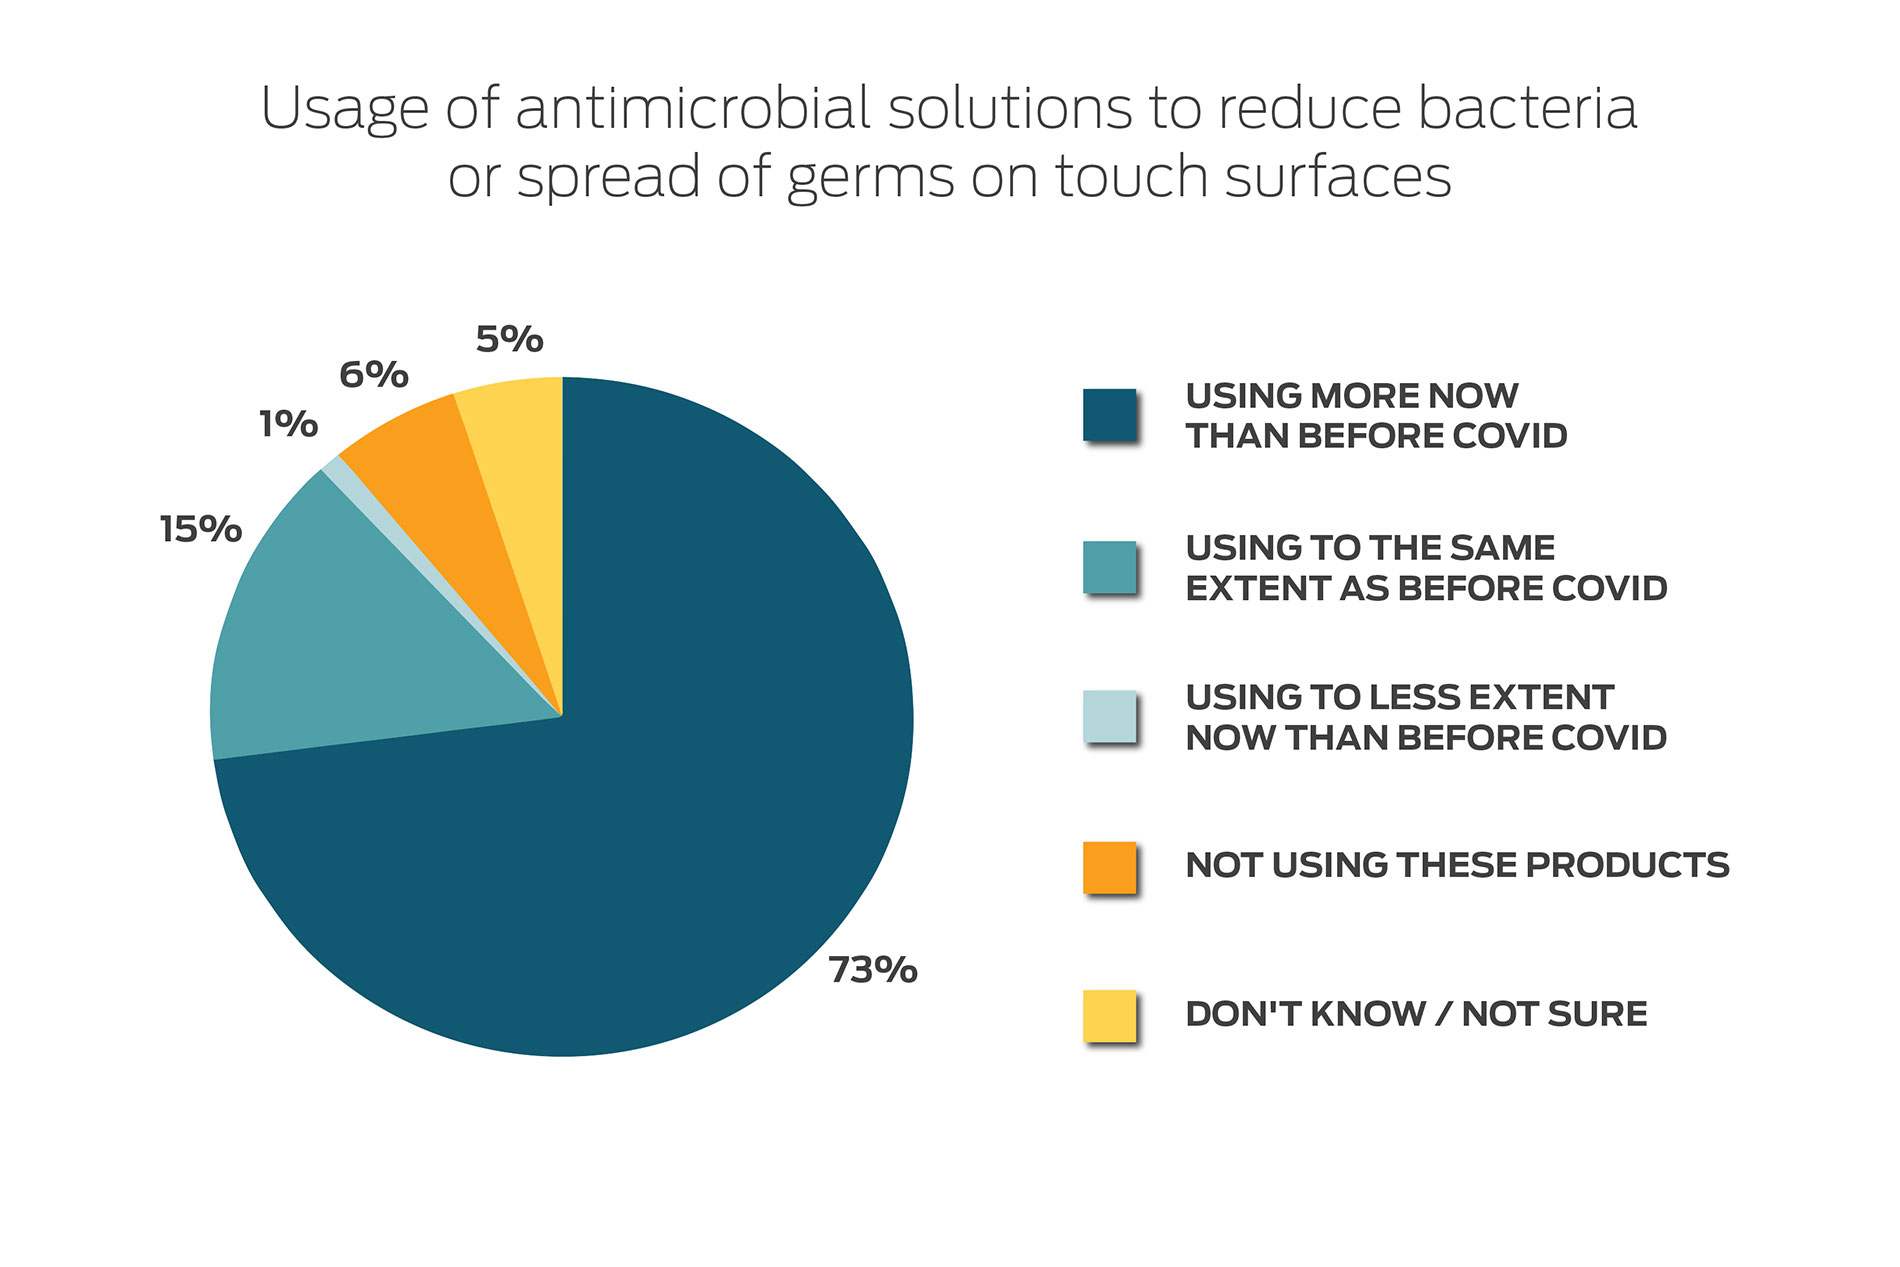 Antimicrobial usage in hospitals for infection control